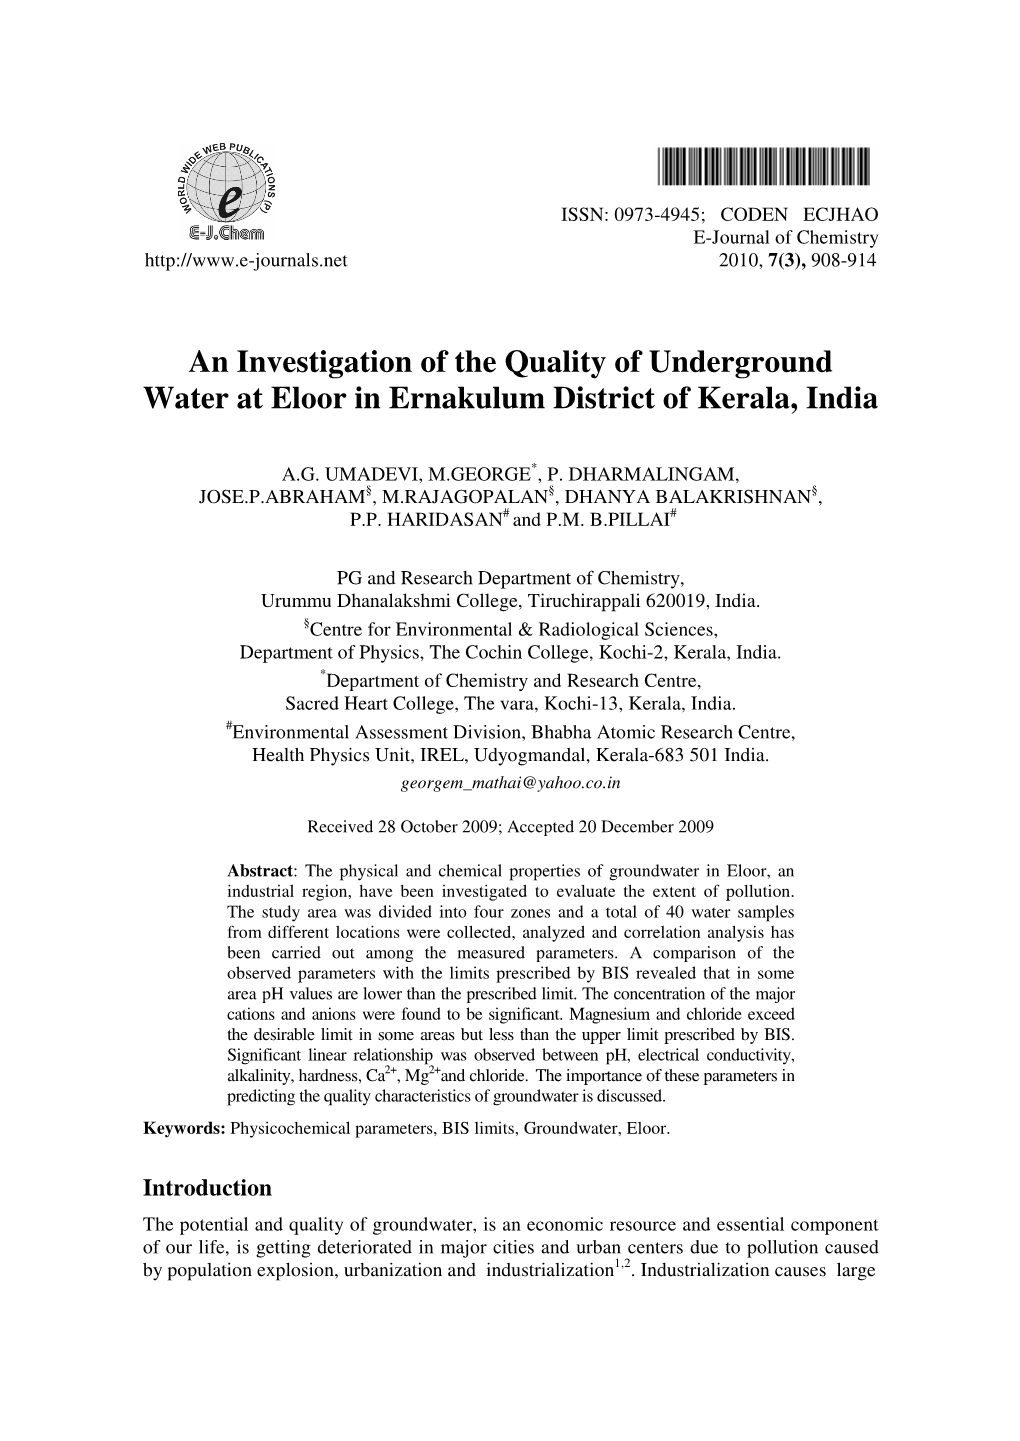 An Investigation of the Quality of Underground Water at Eloor in Ernakulum District of Kerala, India